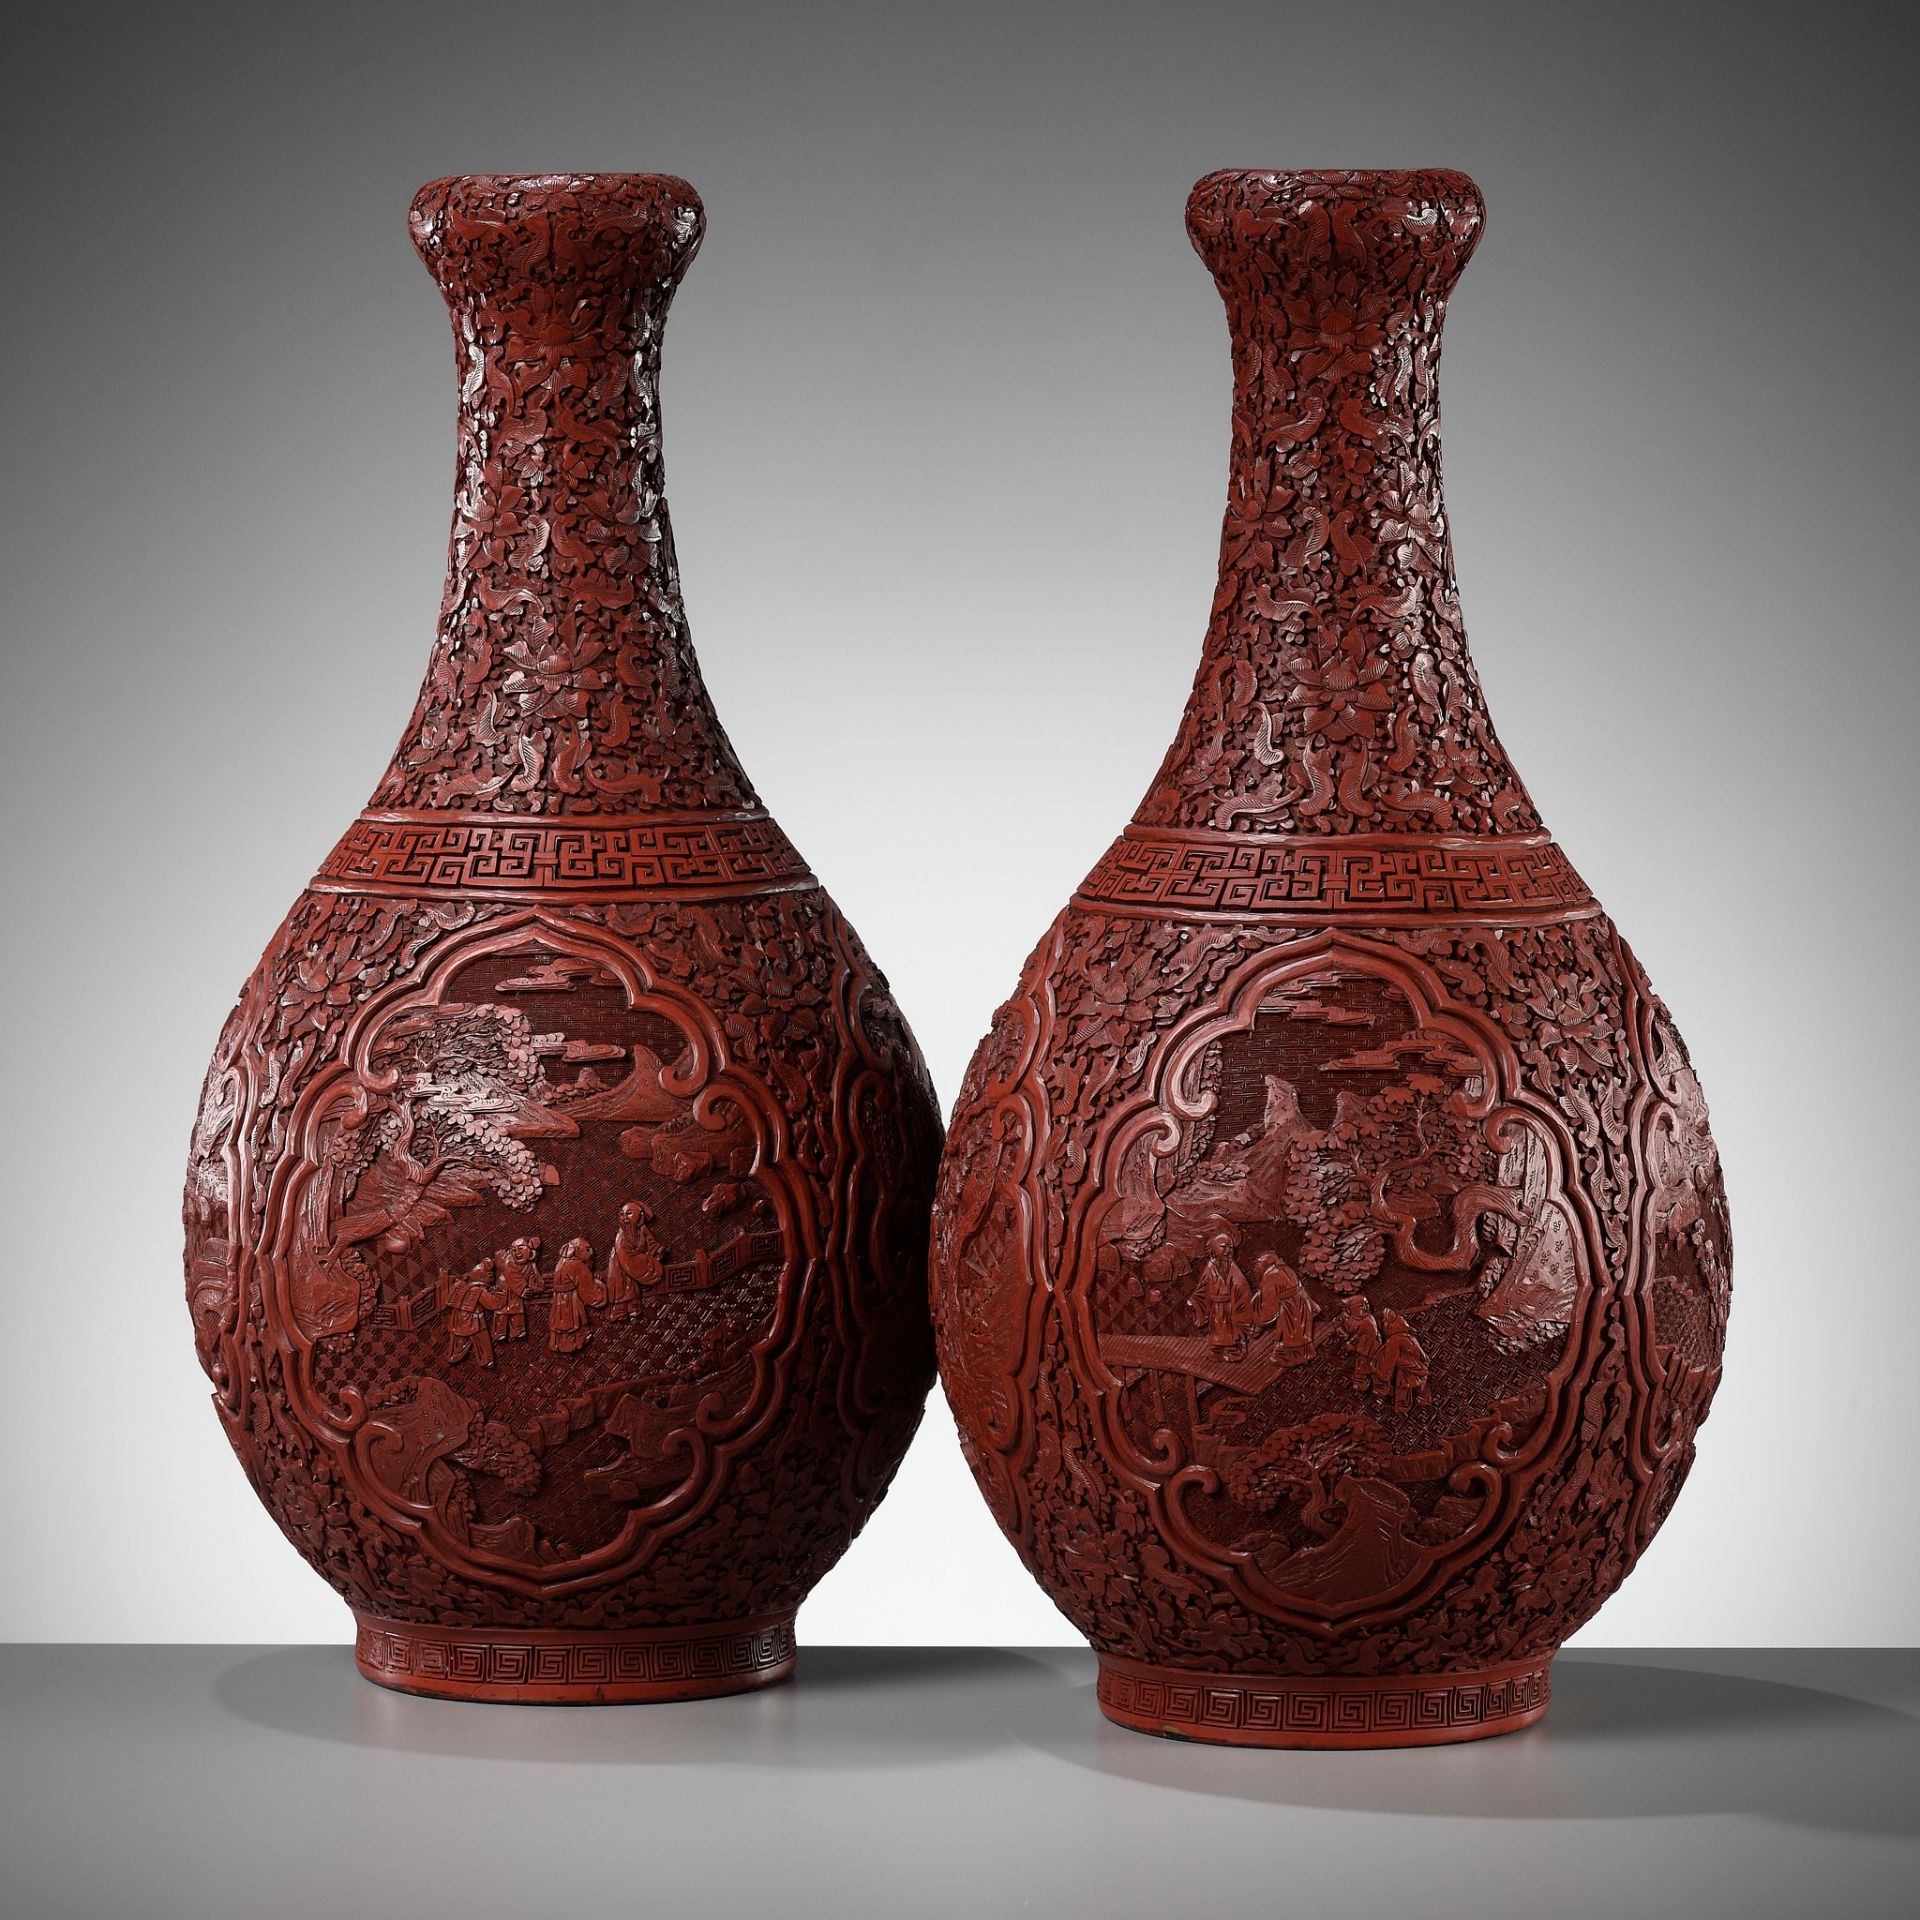 A PAIR OF LARGE CINNABAR LACQUER GARLIC HEAD VASES, CHINA, 1800-1850 - Image 14 of 14